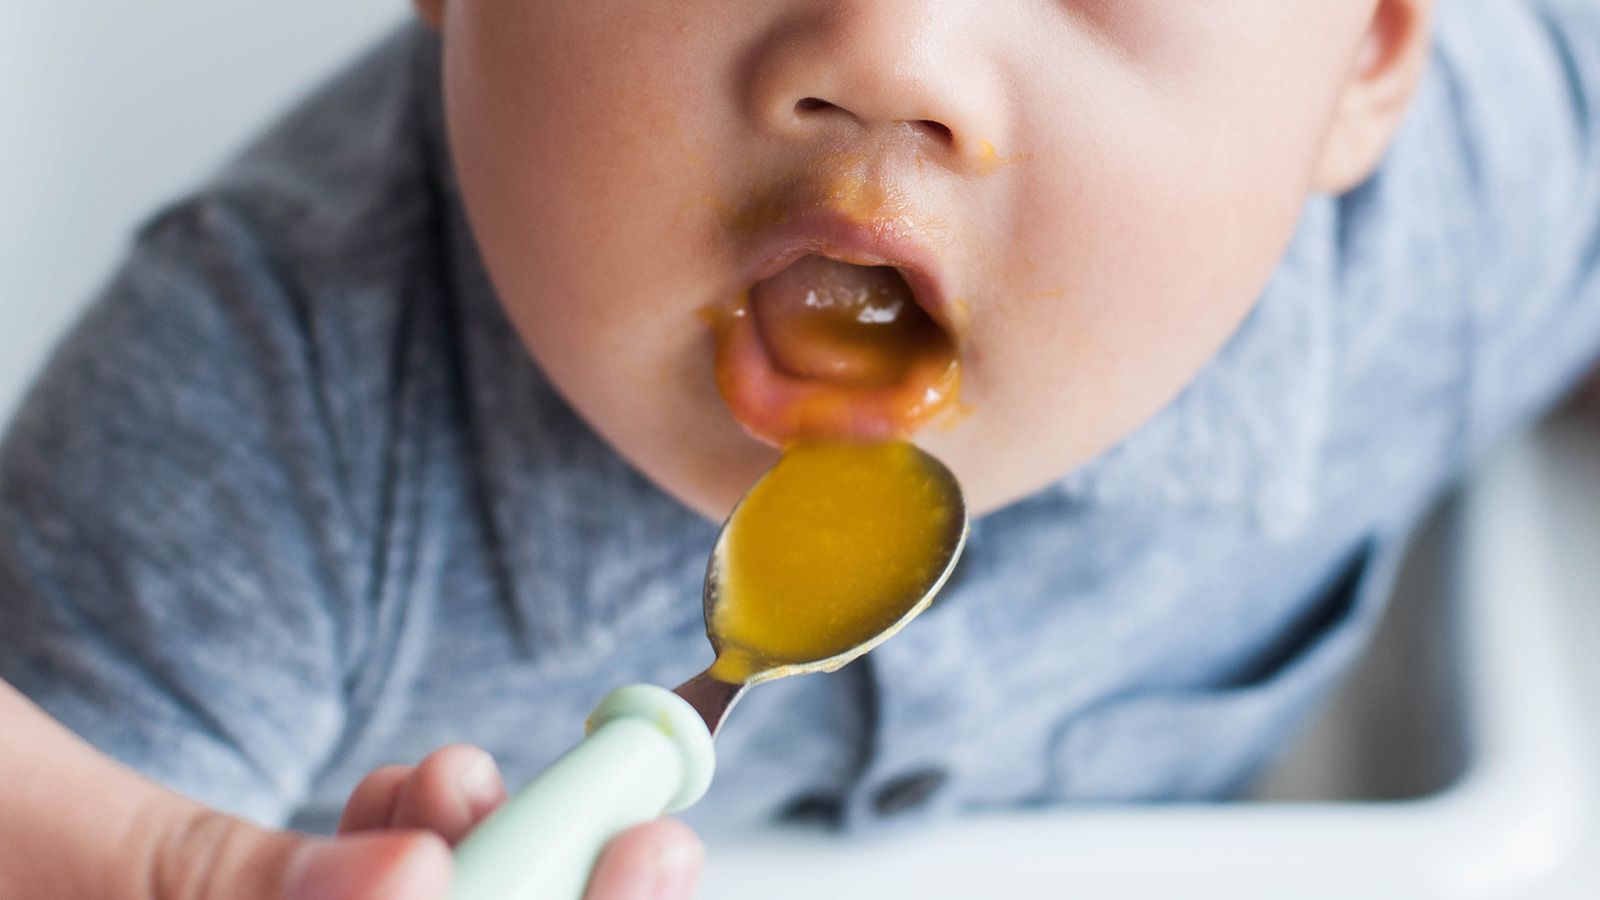 Safety: Creating a Safe Eating Environment for Baby